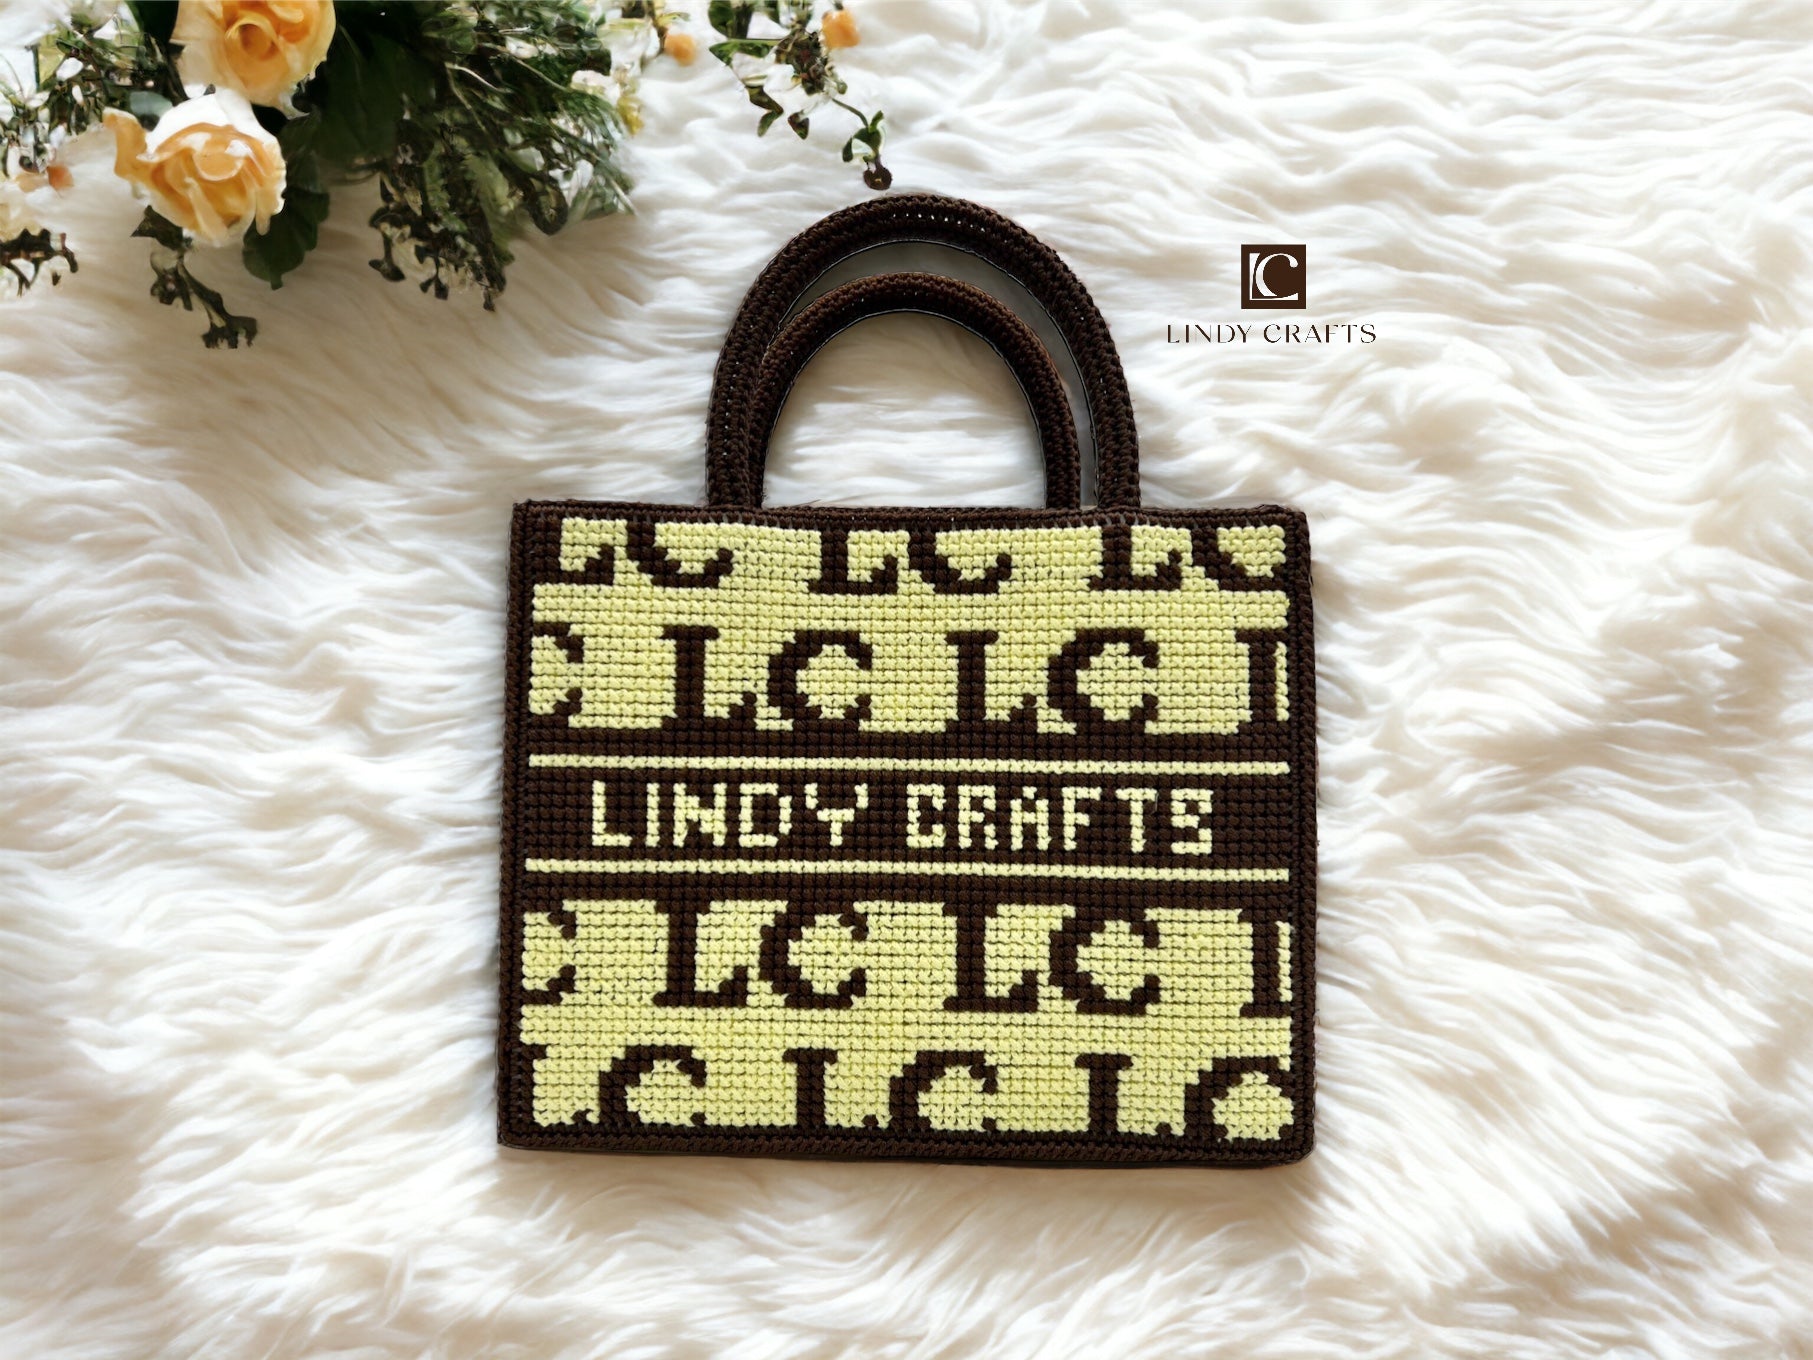 Unique Personalized Name-Embroidered Bag - Made To oder